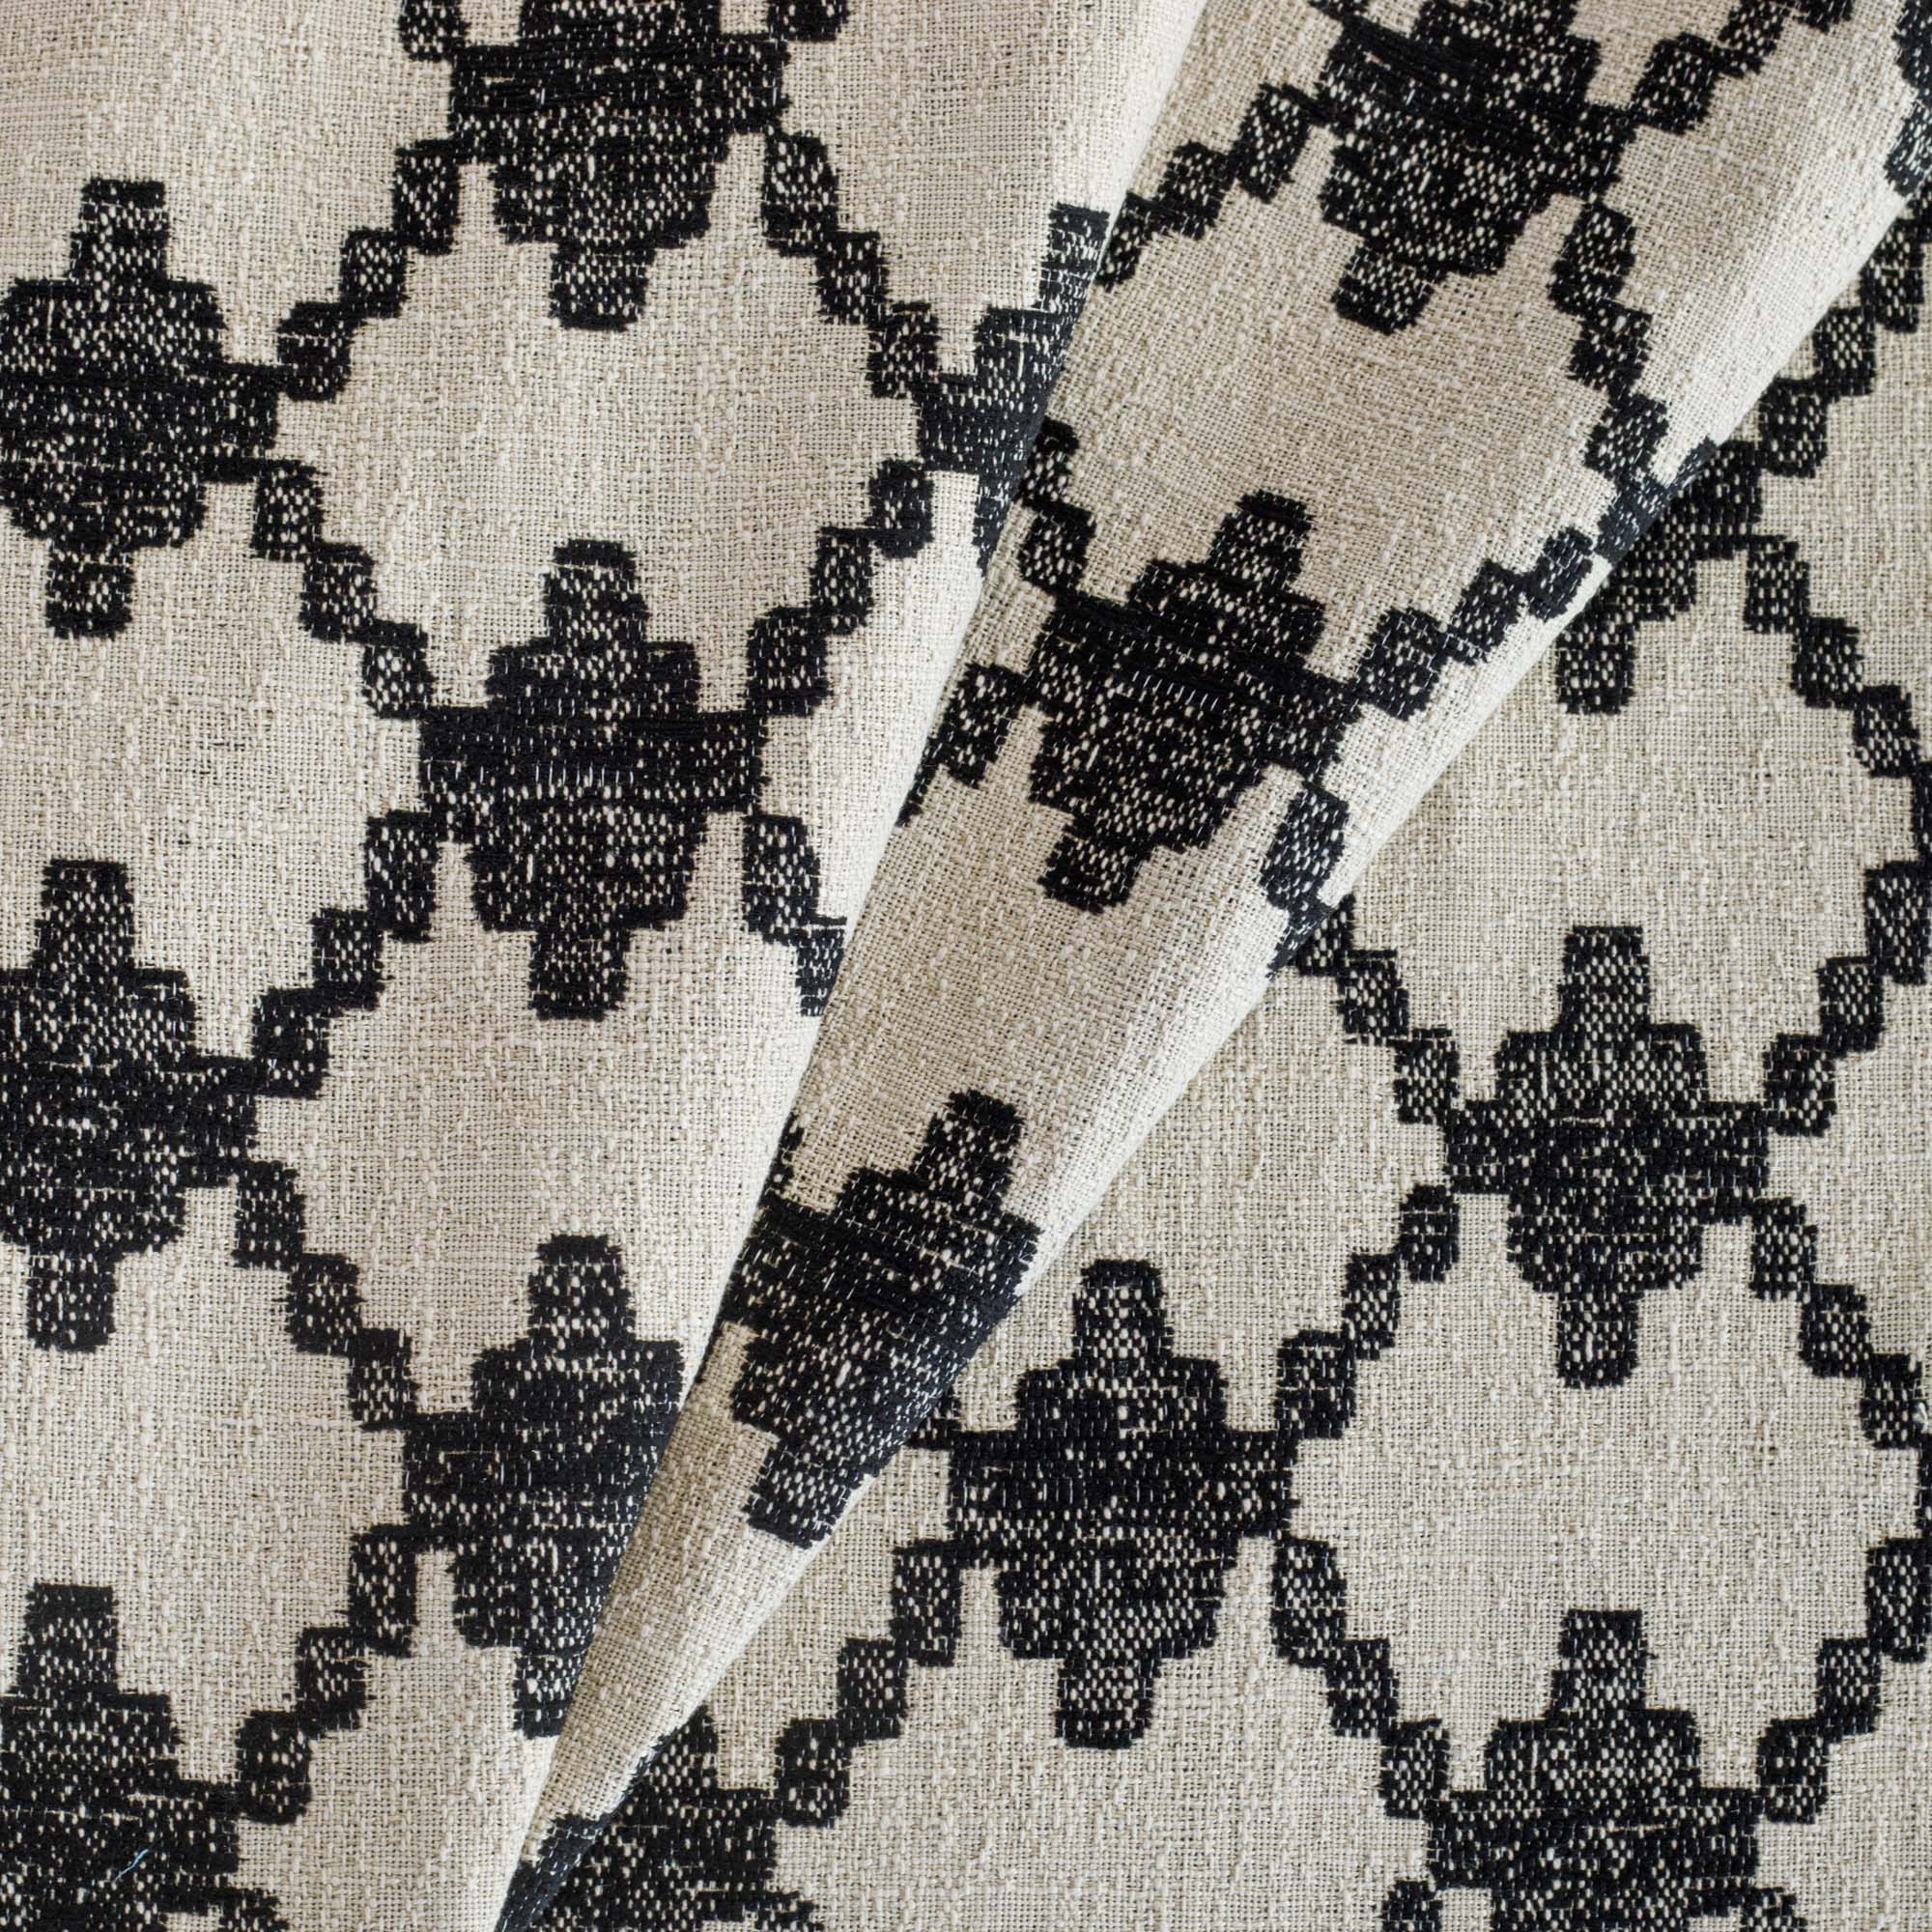 Fez InsideOut Fabric Carbon, a black and burlap beige abstract geometric patterned outdoor upholstery fabric from Tonic Living